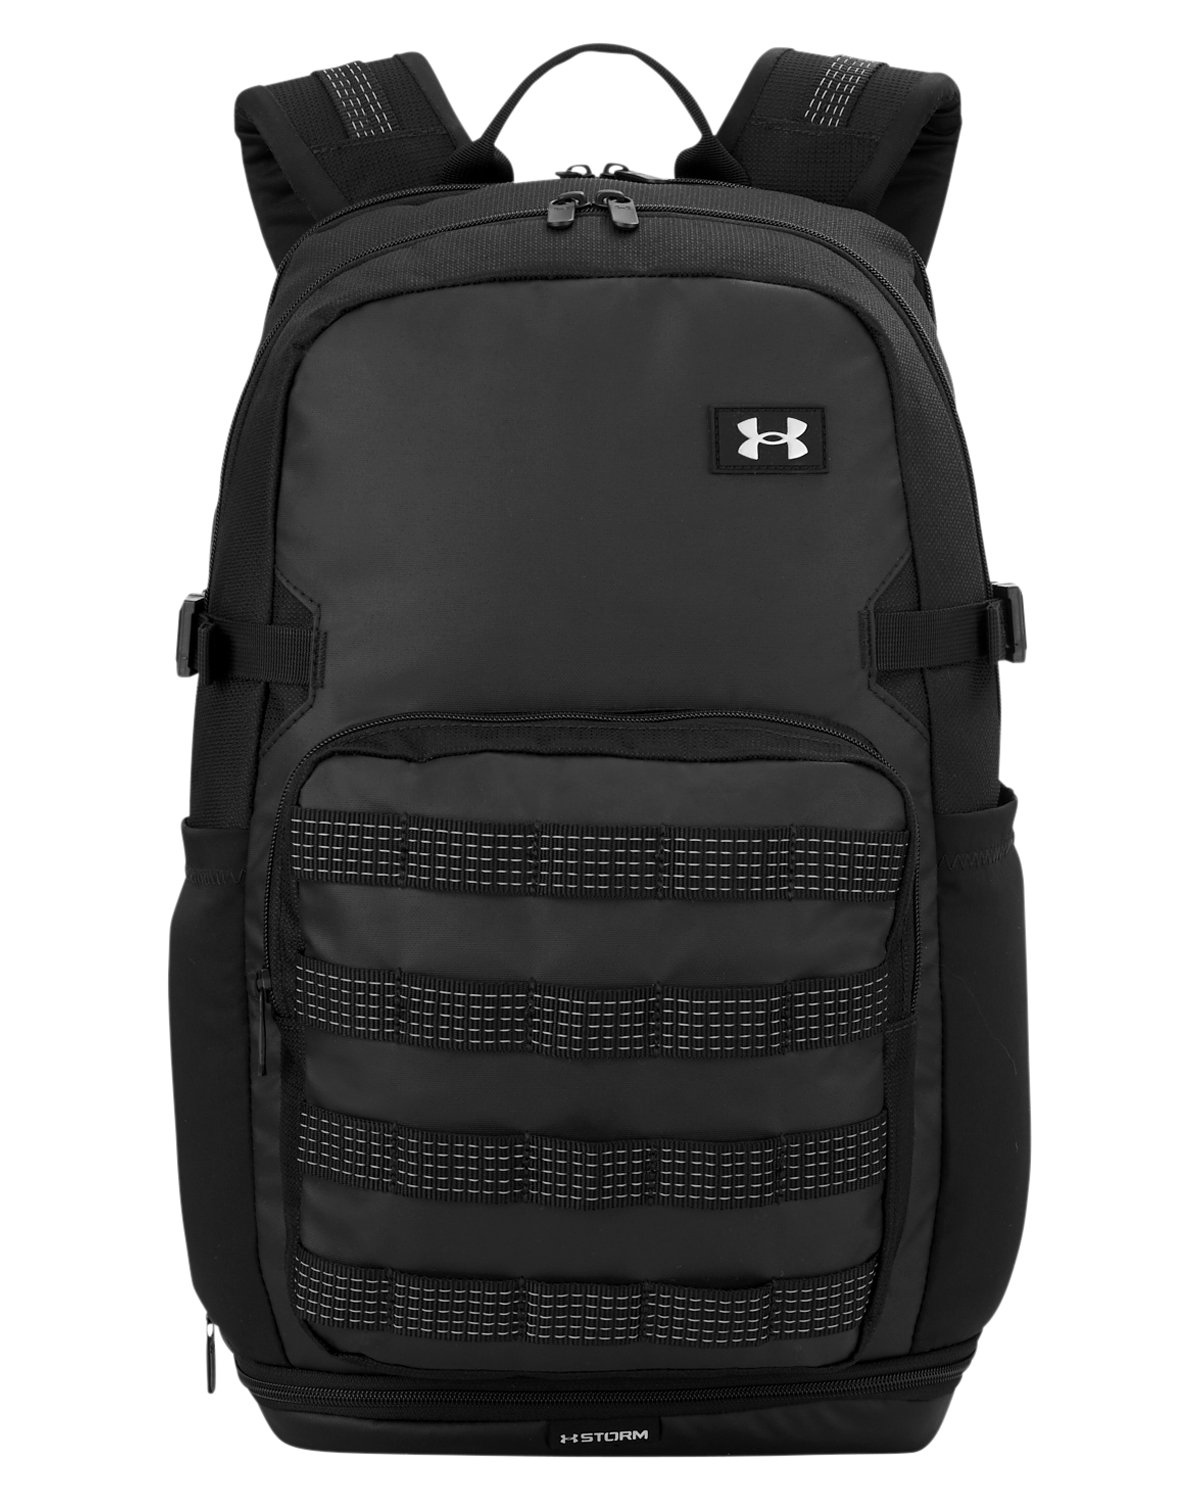 Under Armour 1372290 - Triumph Backpack